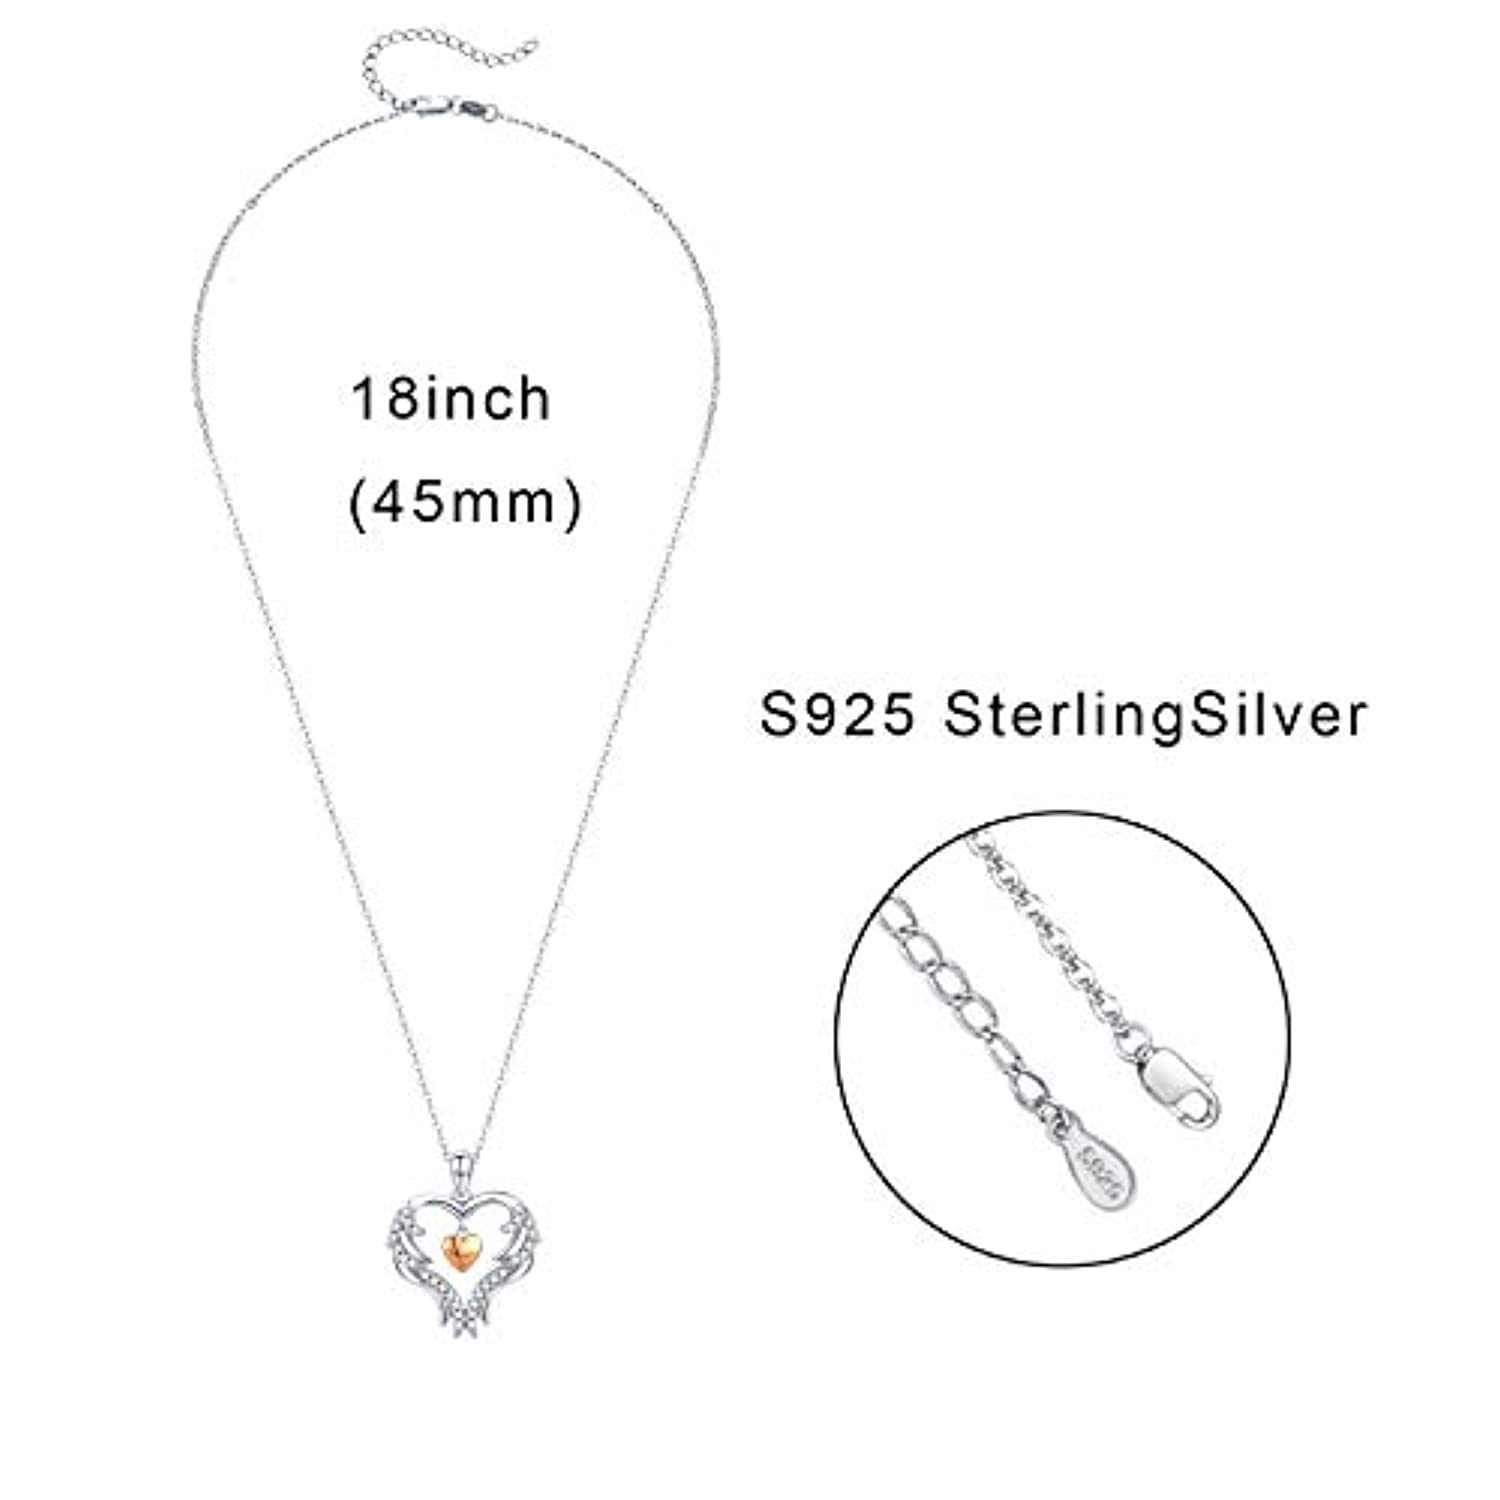 Angel Wings Necklace Heart Necklace S925 Sterling Silver Love Heart Pendant Romantic Jewelry Gifts with Gift Box for Women Girls Anniversary Wedding